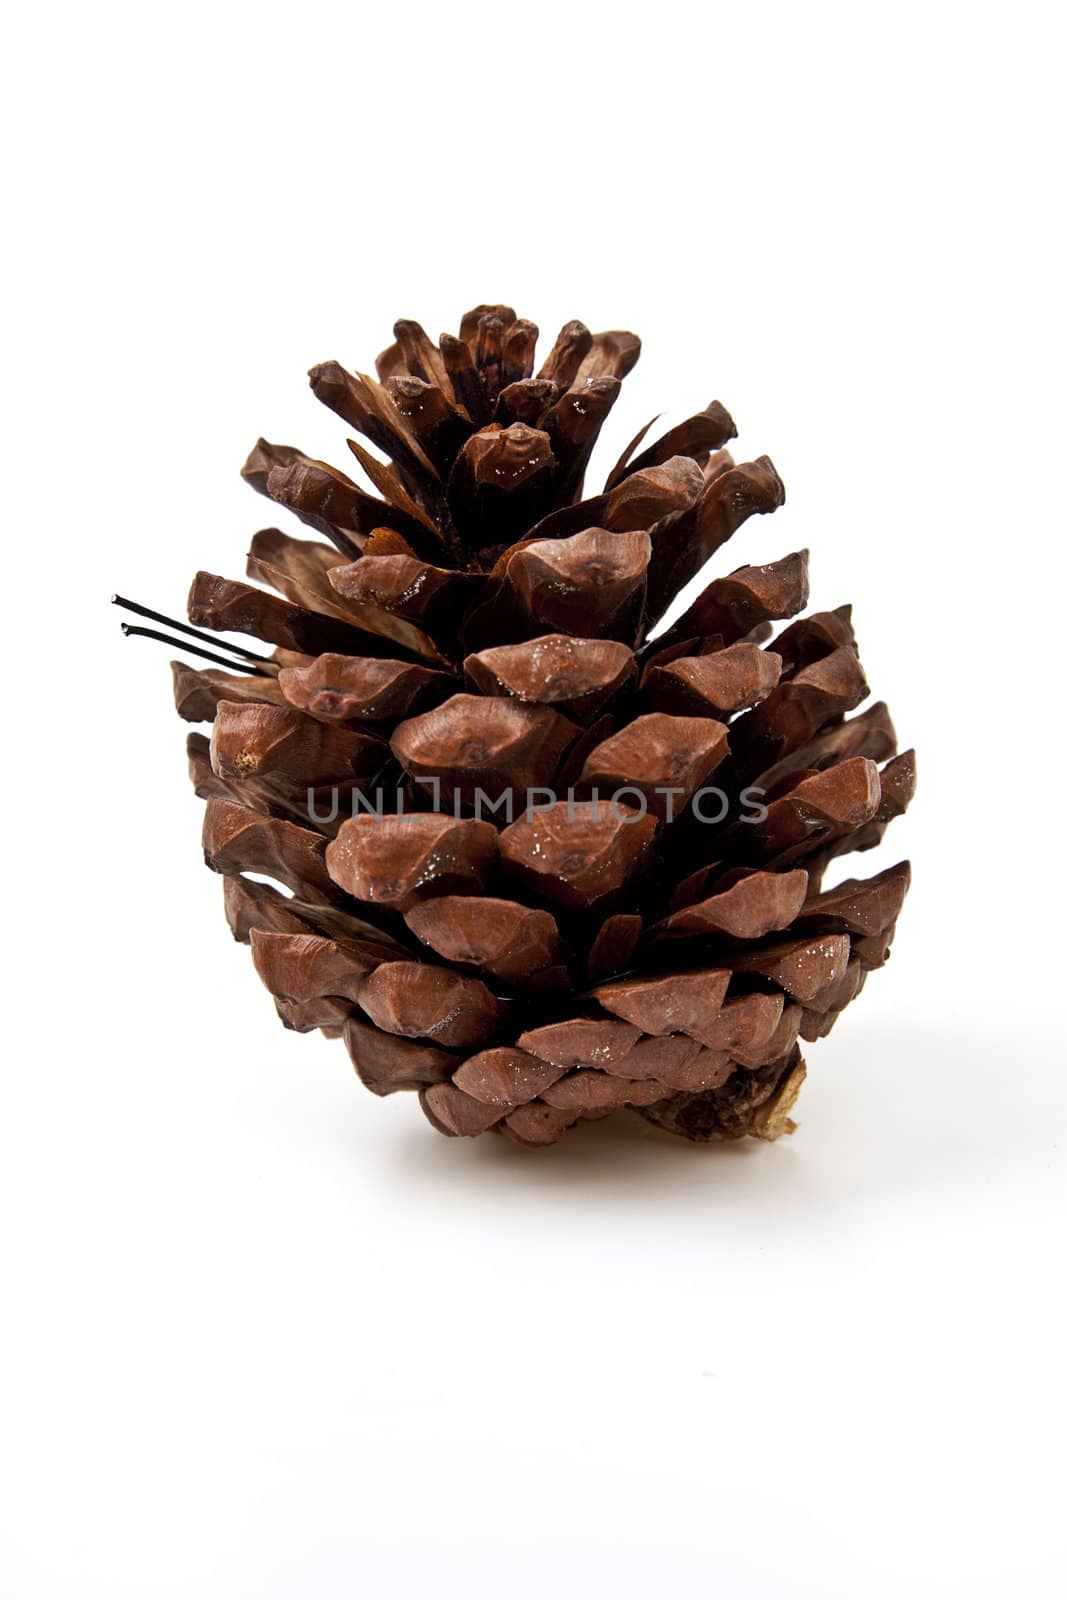 Pine cones on white background by posterize